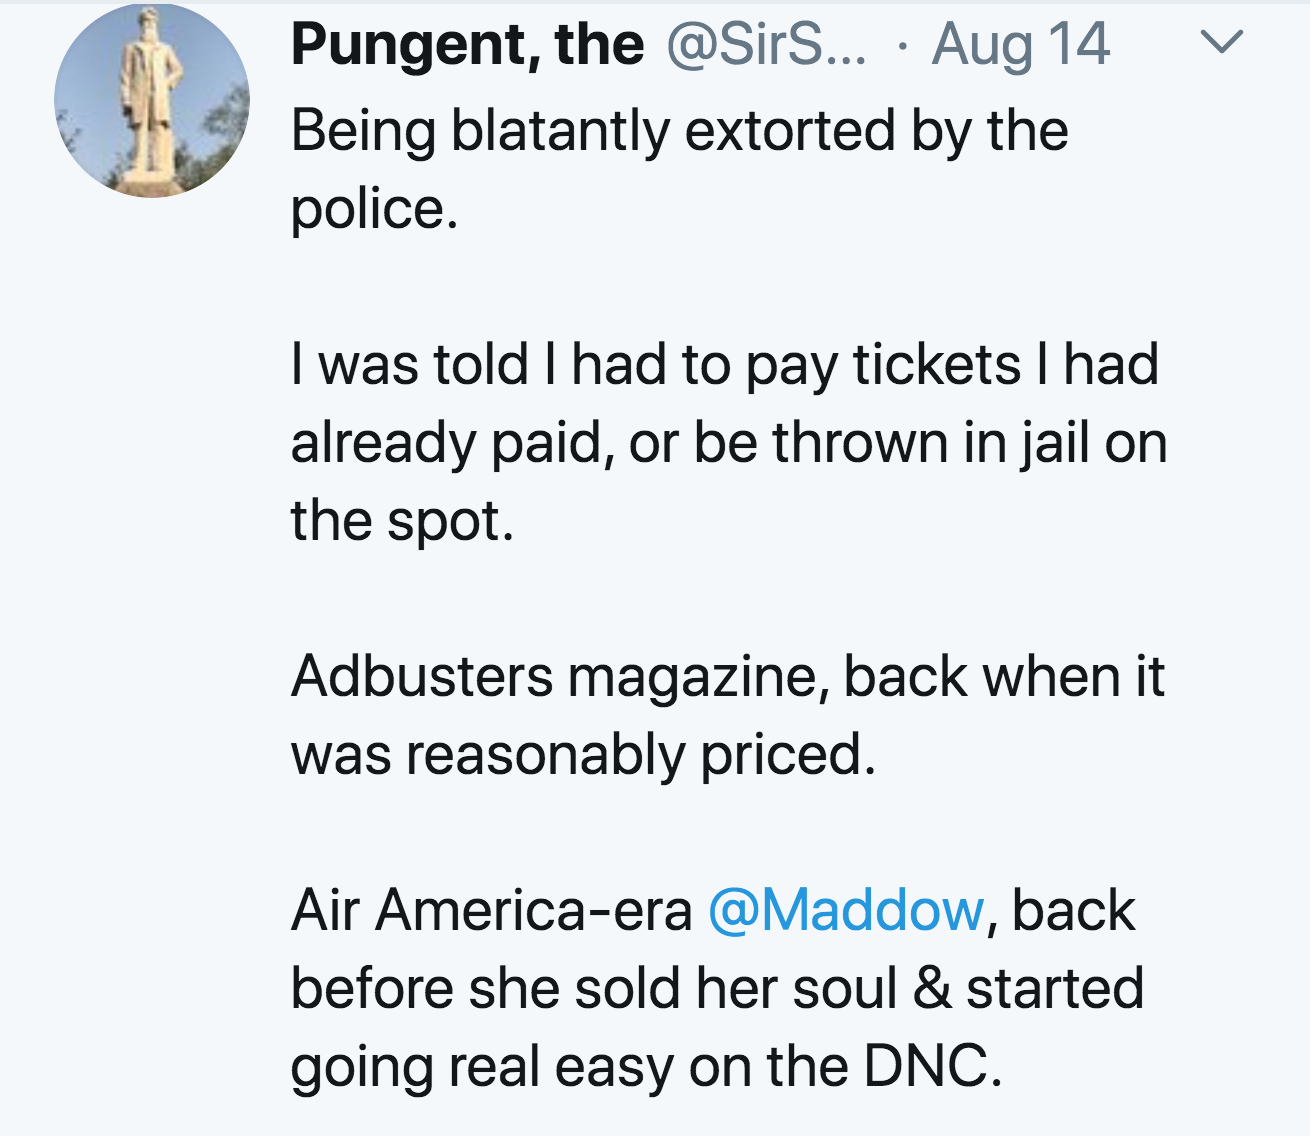 angle - Pungent, the ... Aug 14 Being blatantly extorted by the police. I was told I had to pay tickets I had already paid, or be thrown in jail on the spot. Adbusters magazine, back when it was reasonably priced. Air Americaera , back before she sold her